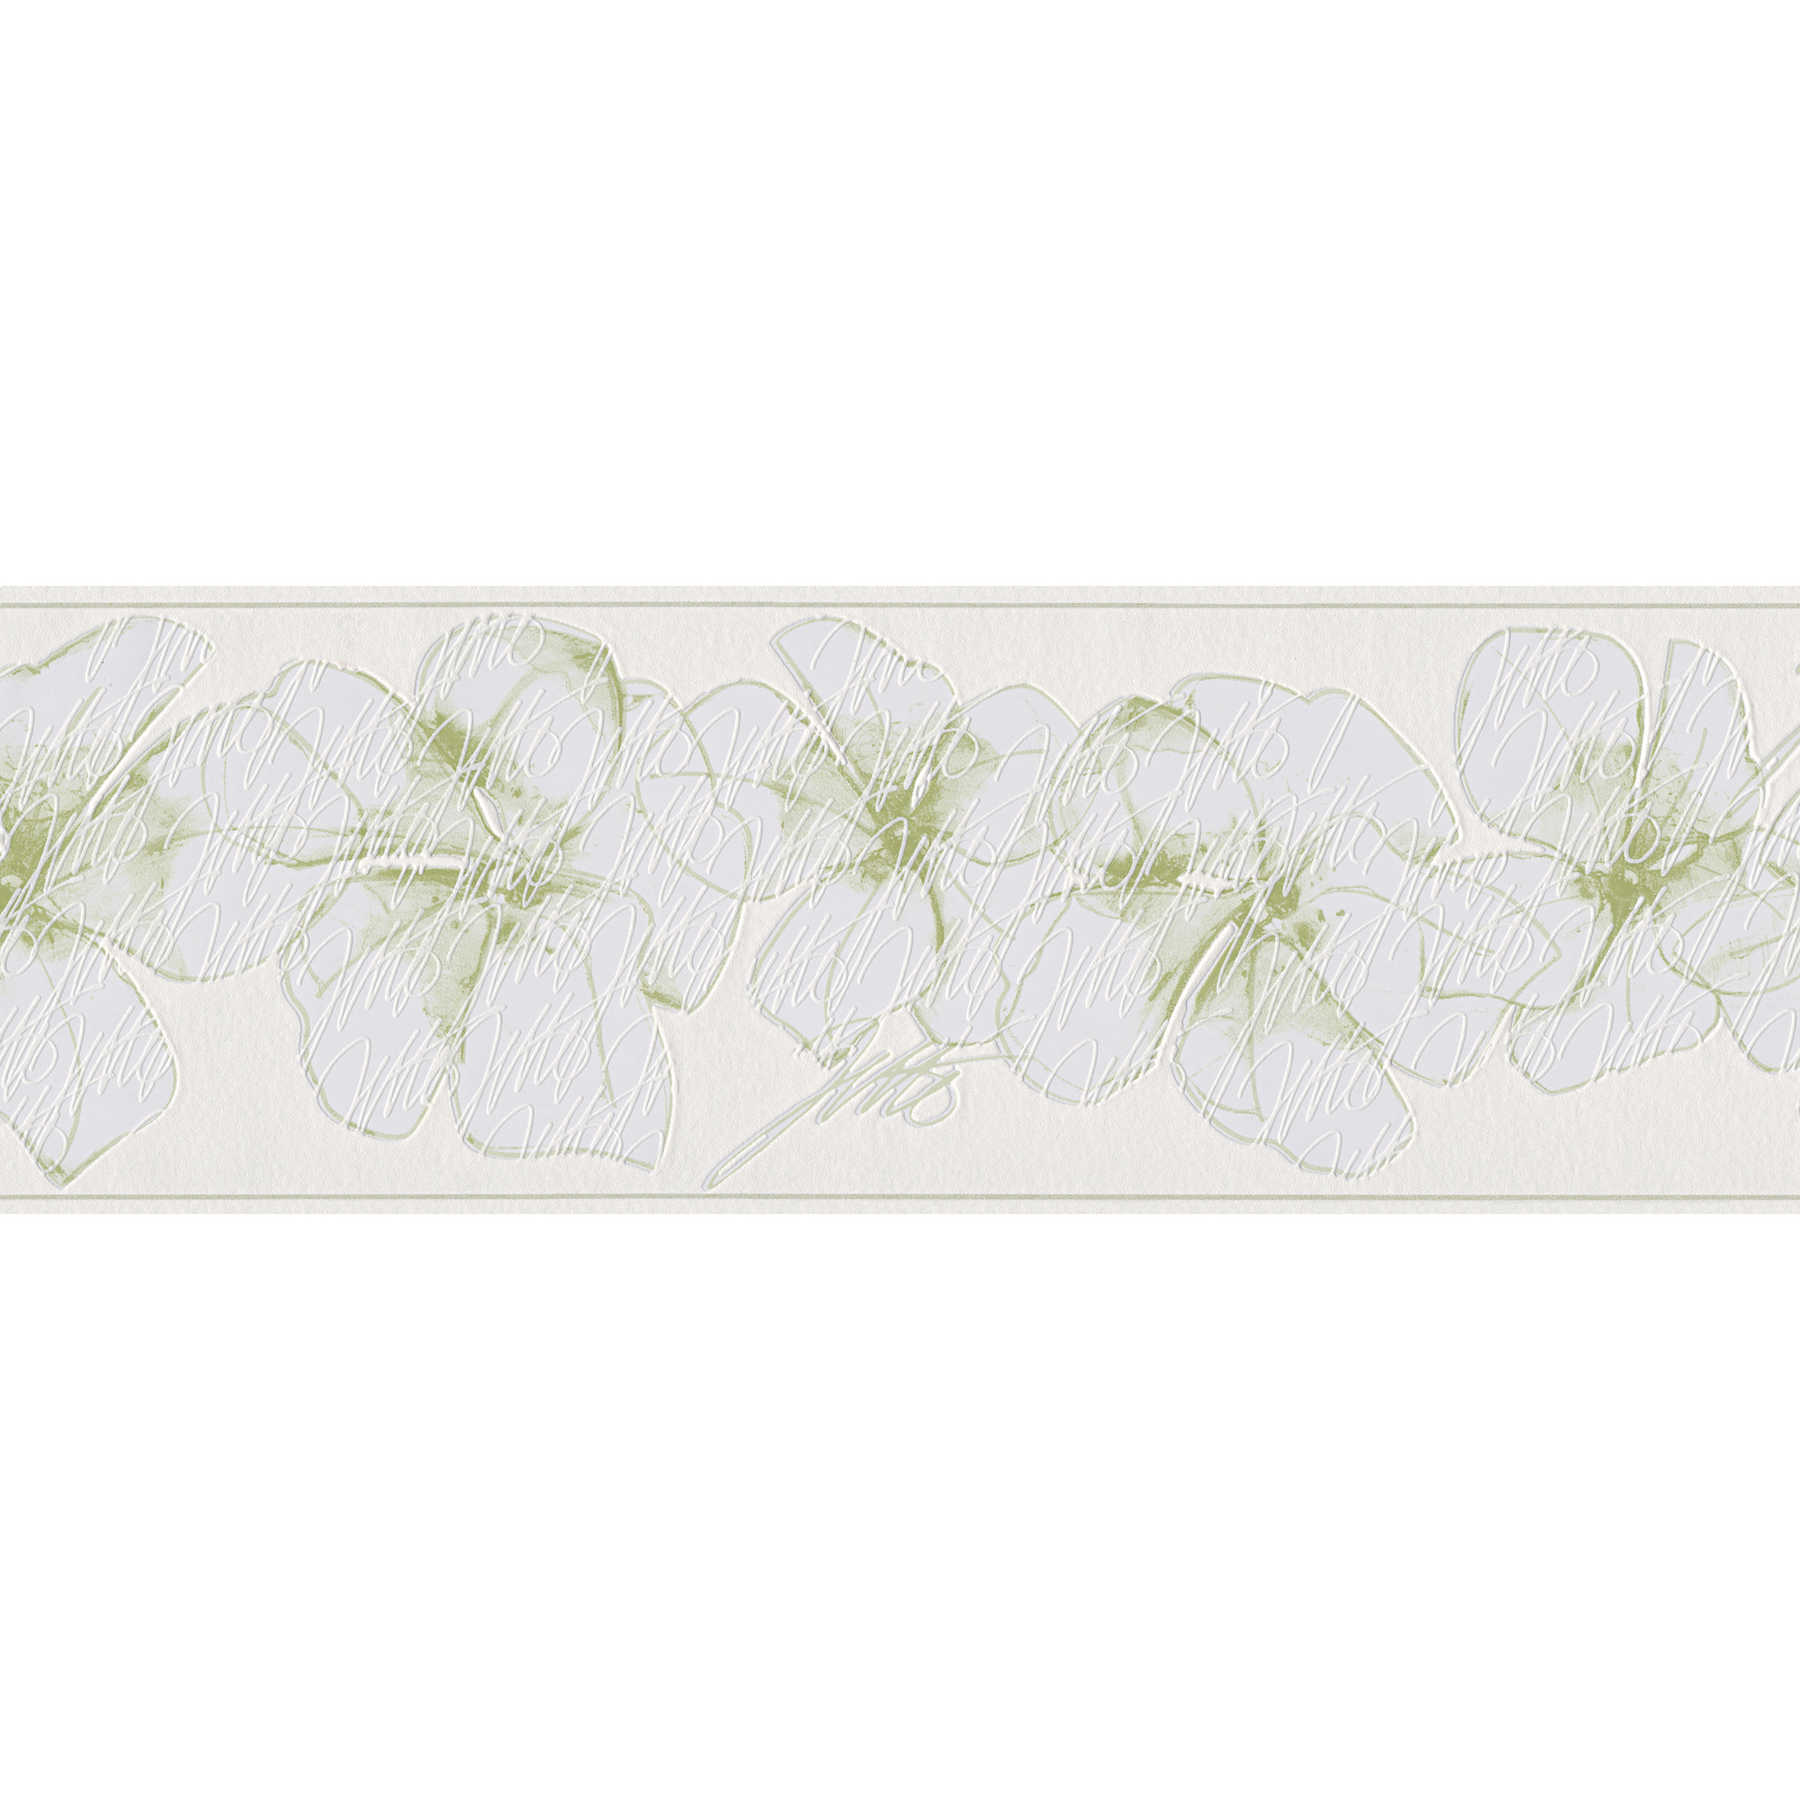         Floral wallpaper border with floral pattern - green, white
    